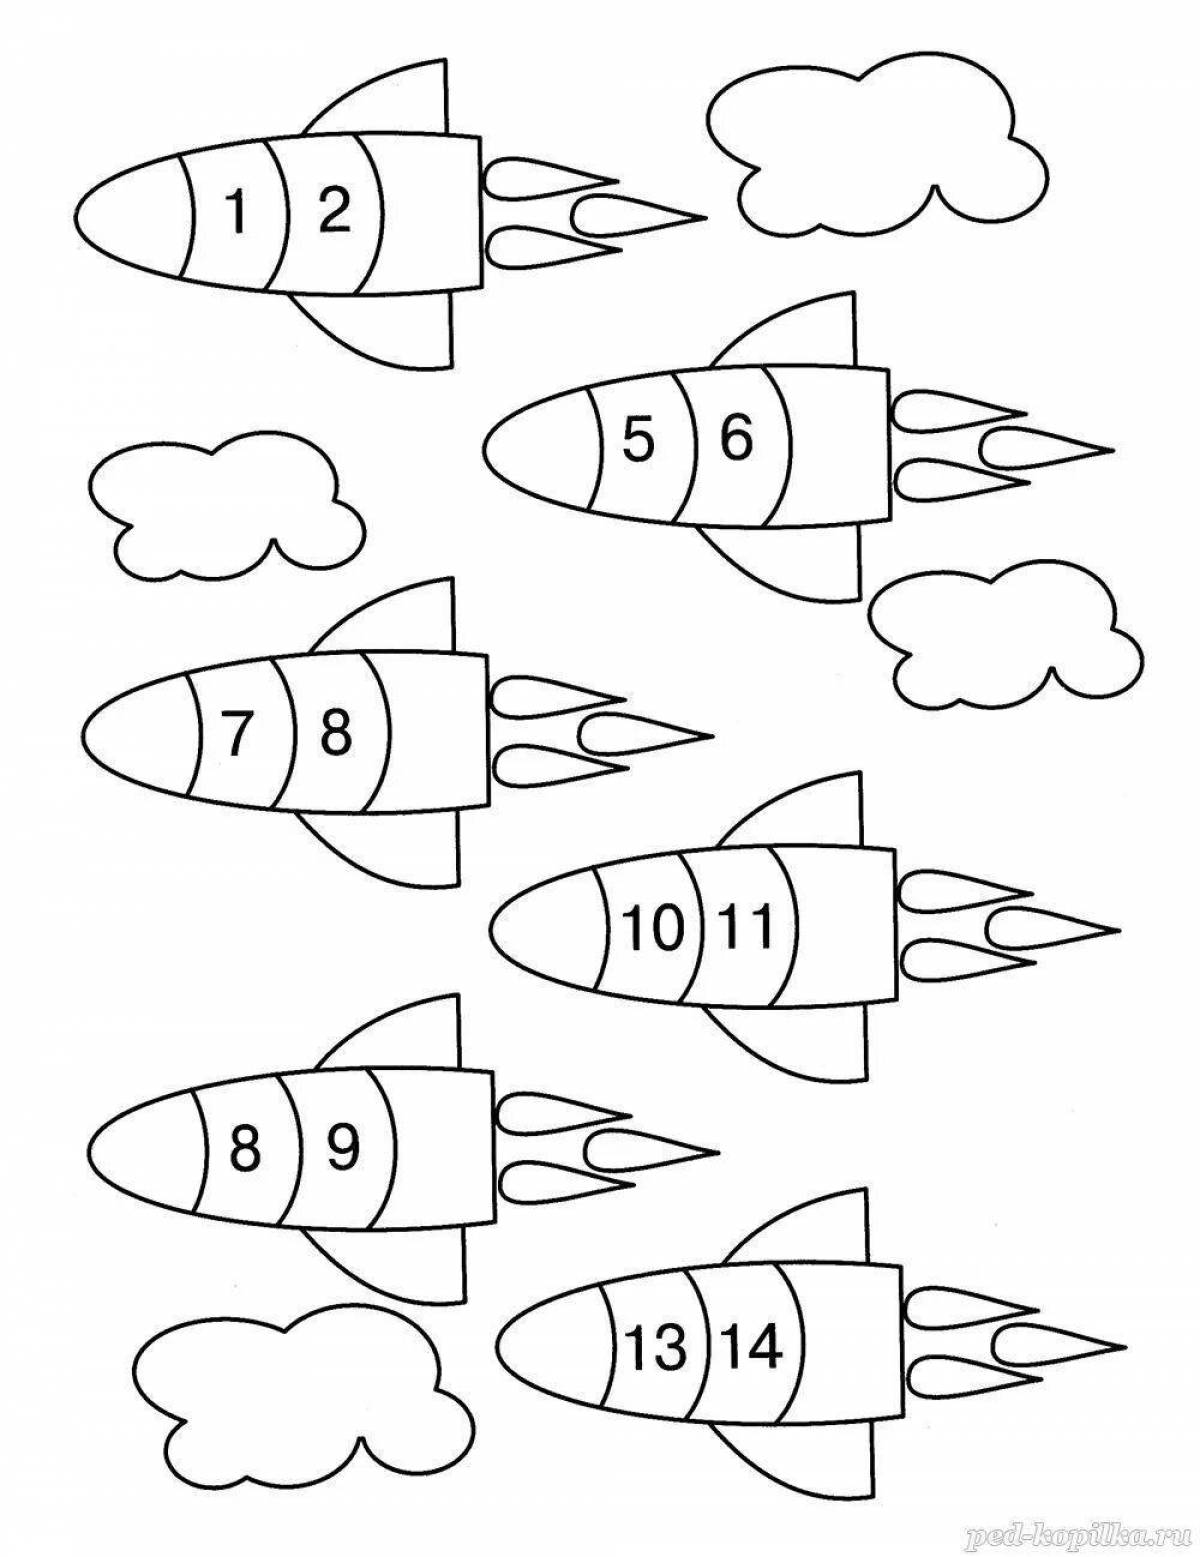 Creative math coloring book for 4-5 year olds